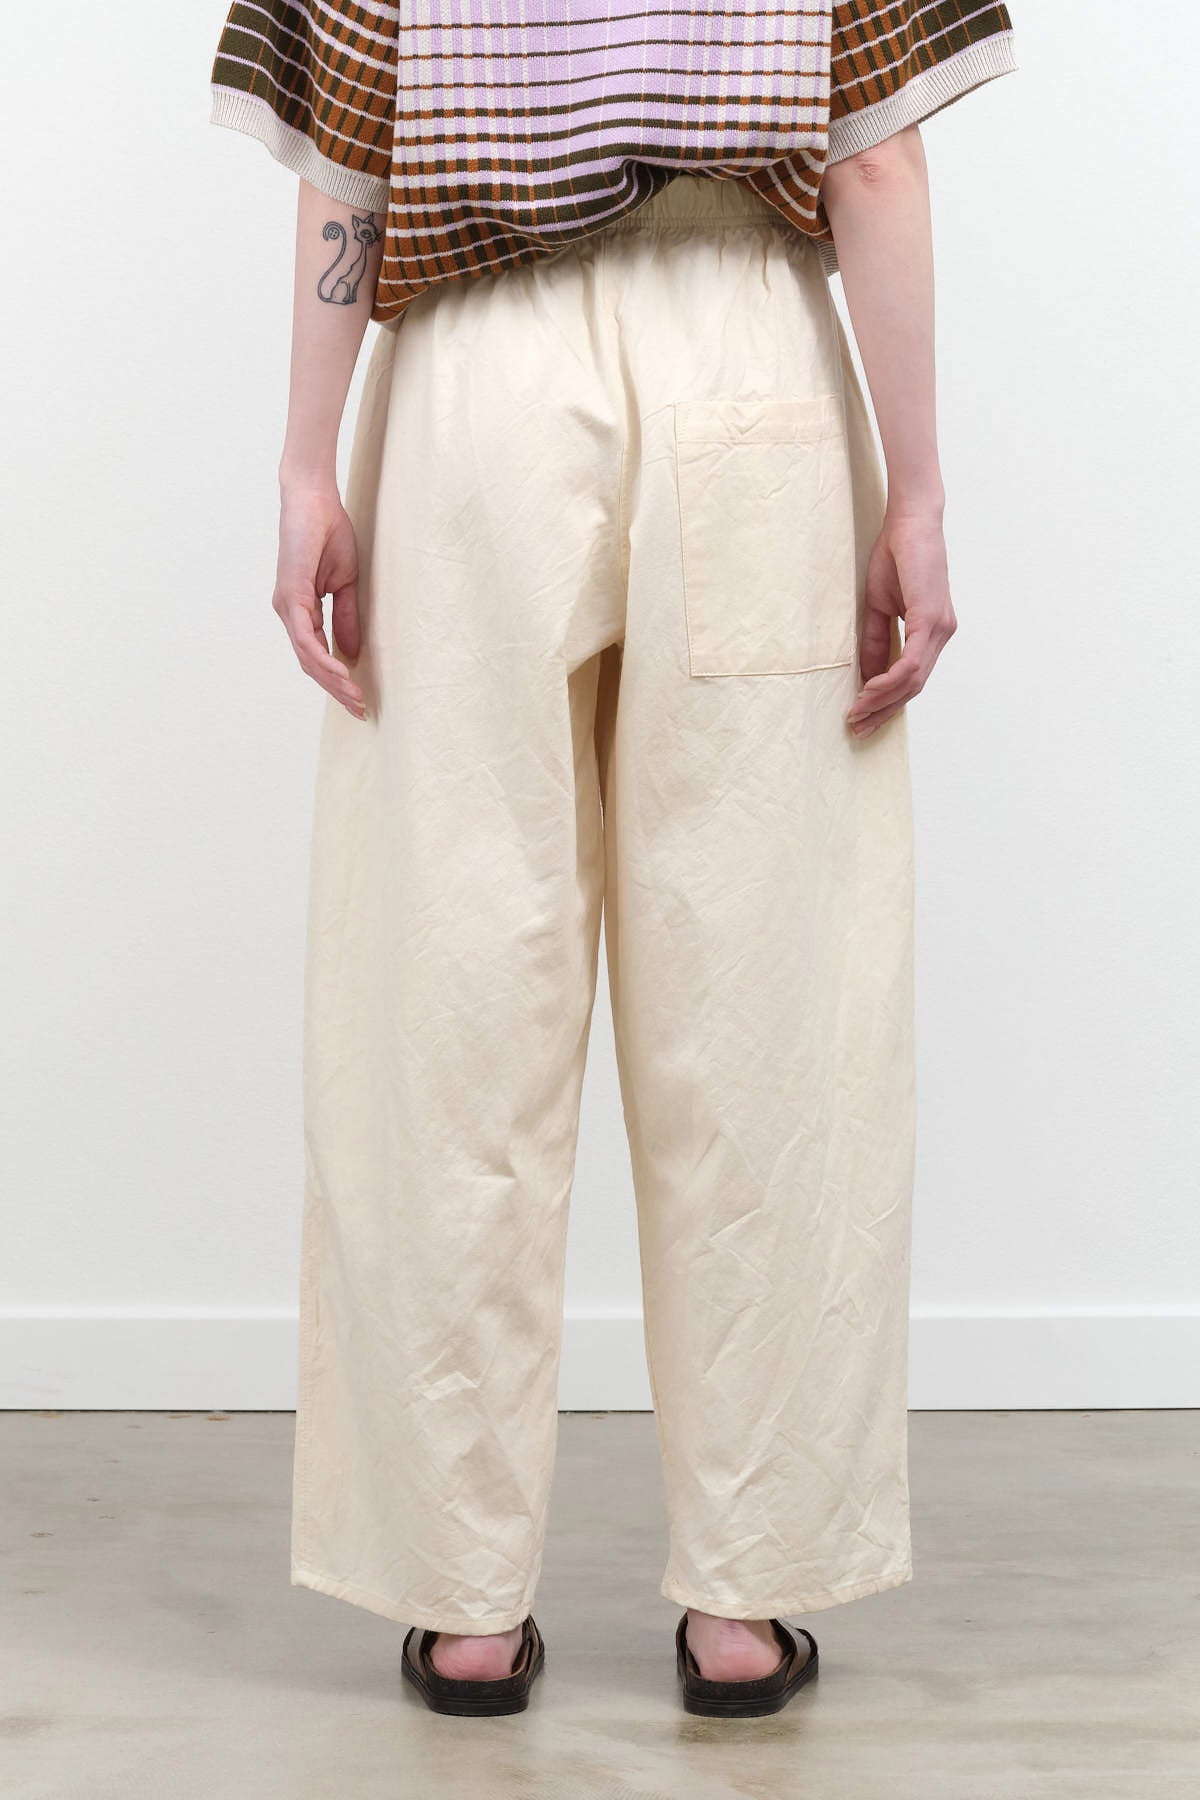 Full Length Wide Twill Trouser in Natural Tan with Large Back Pocket by Wol Hide